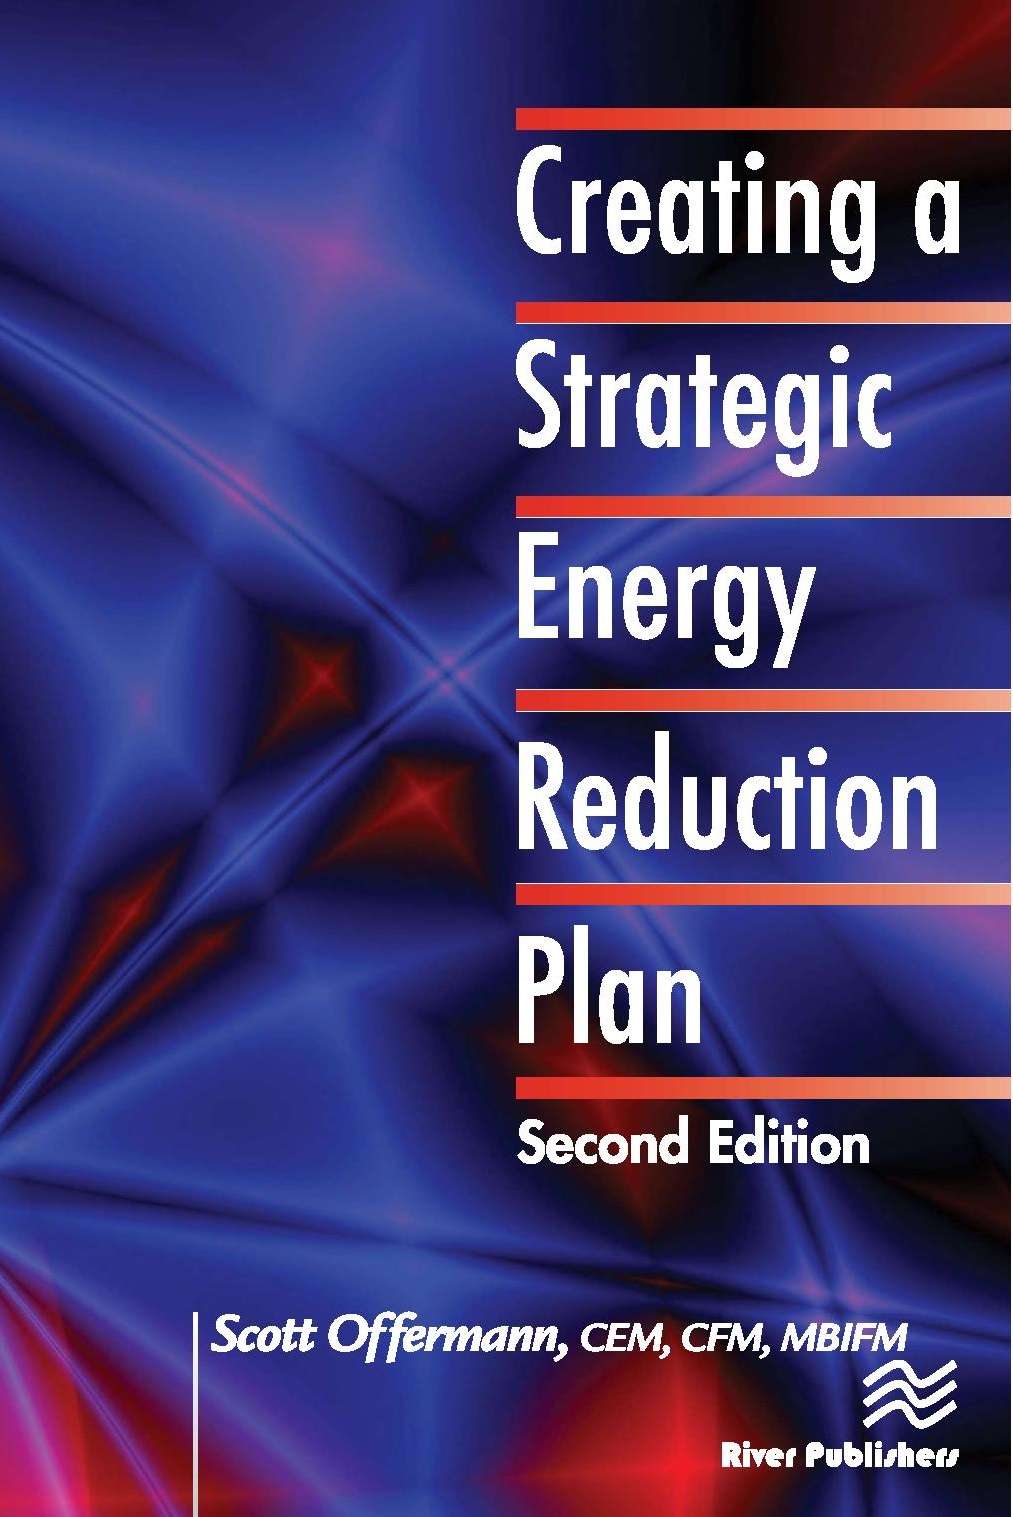 Creating a Strategic Energy Reduction Plan, Second Edition